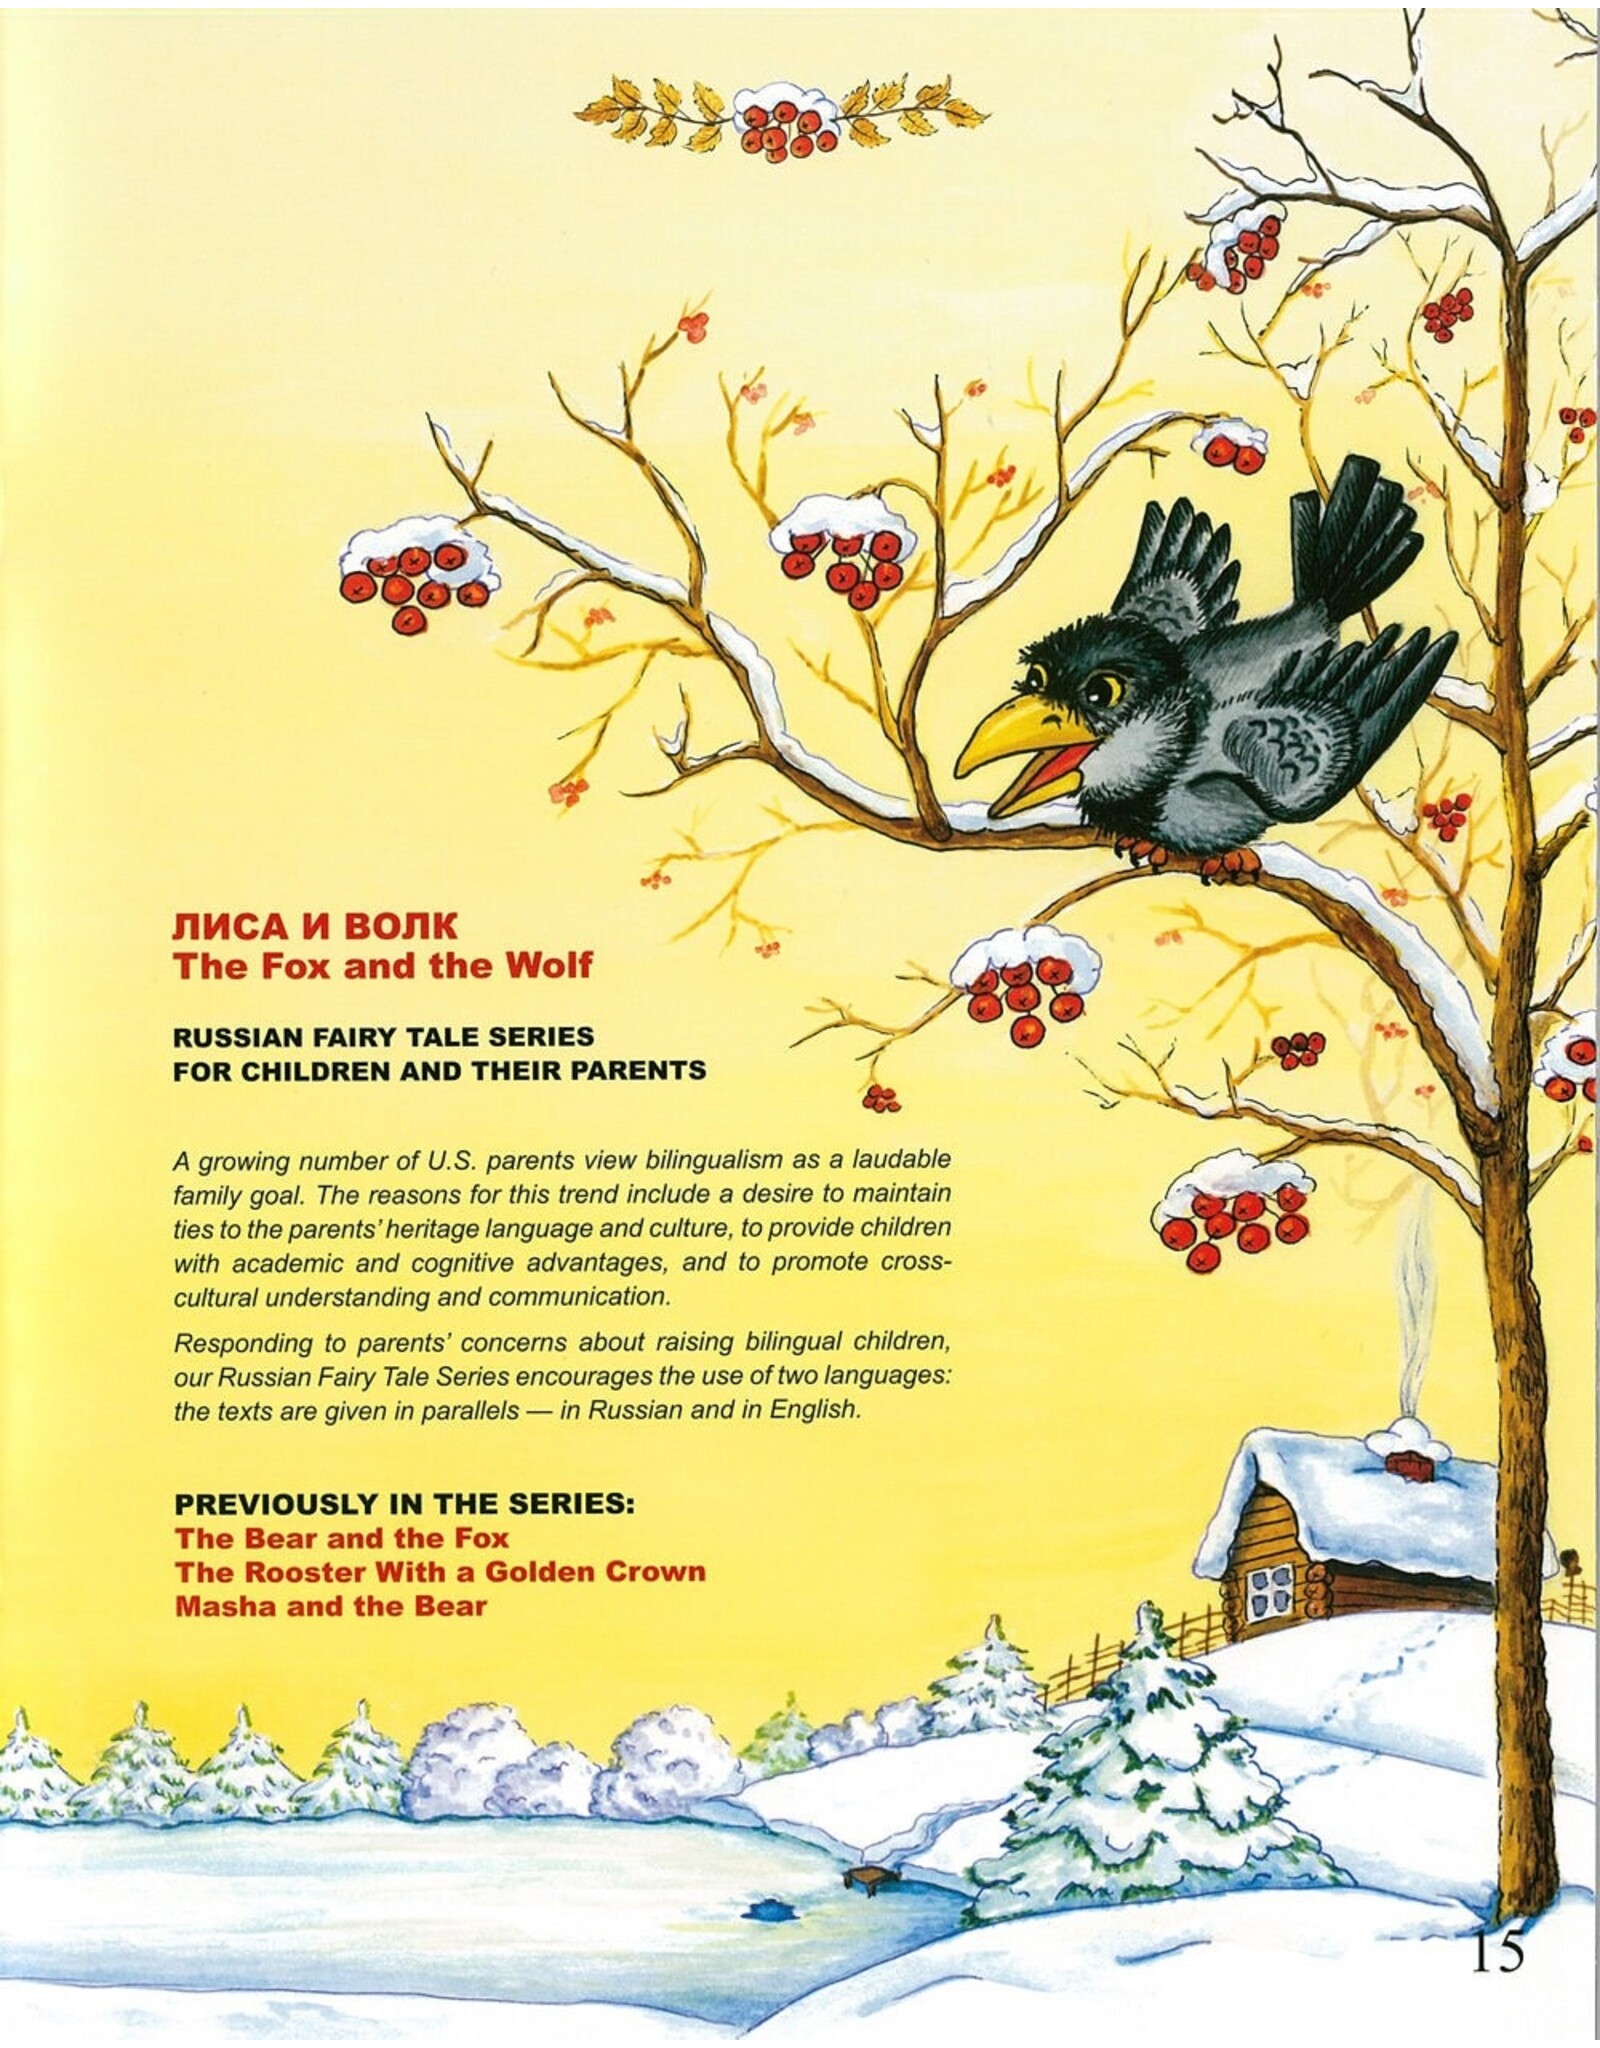 The Fox and the Wolf Bilingual Children's Book